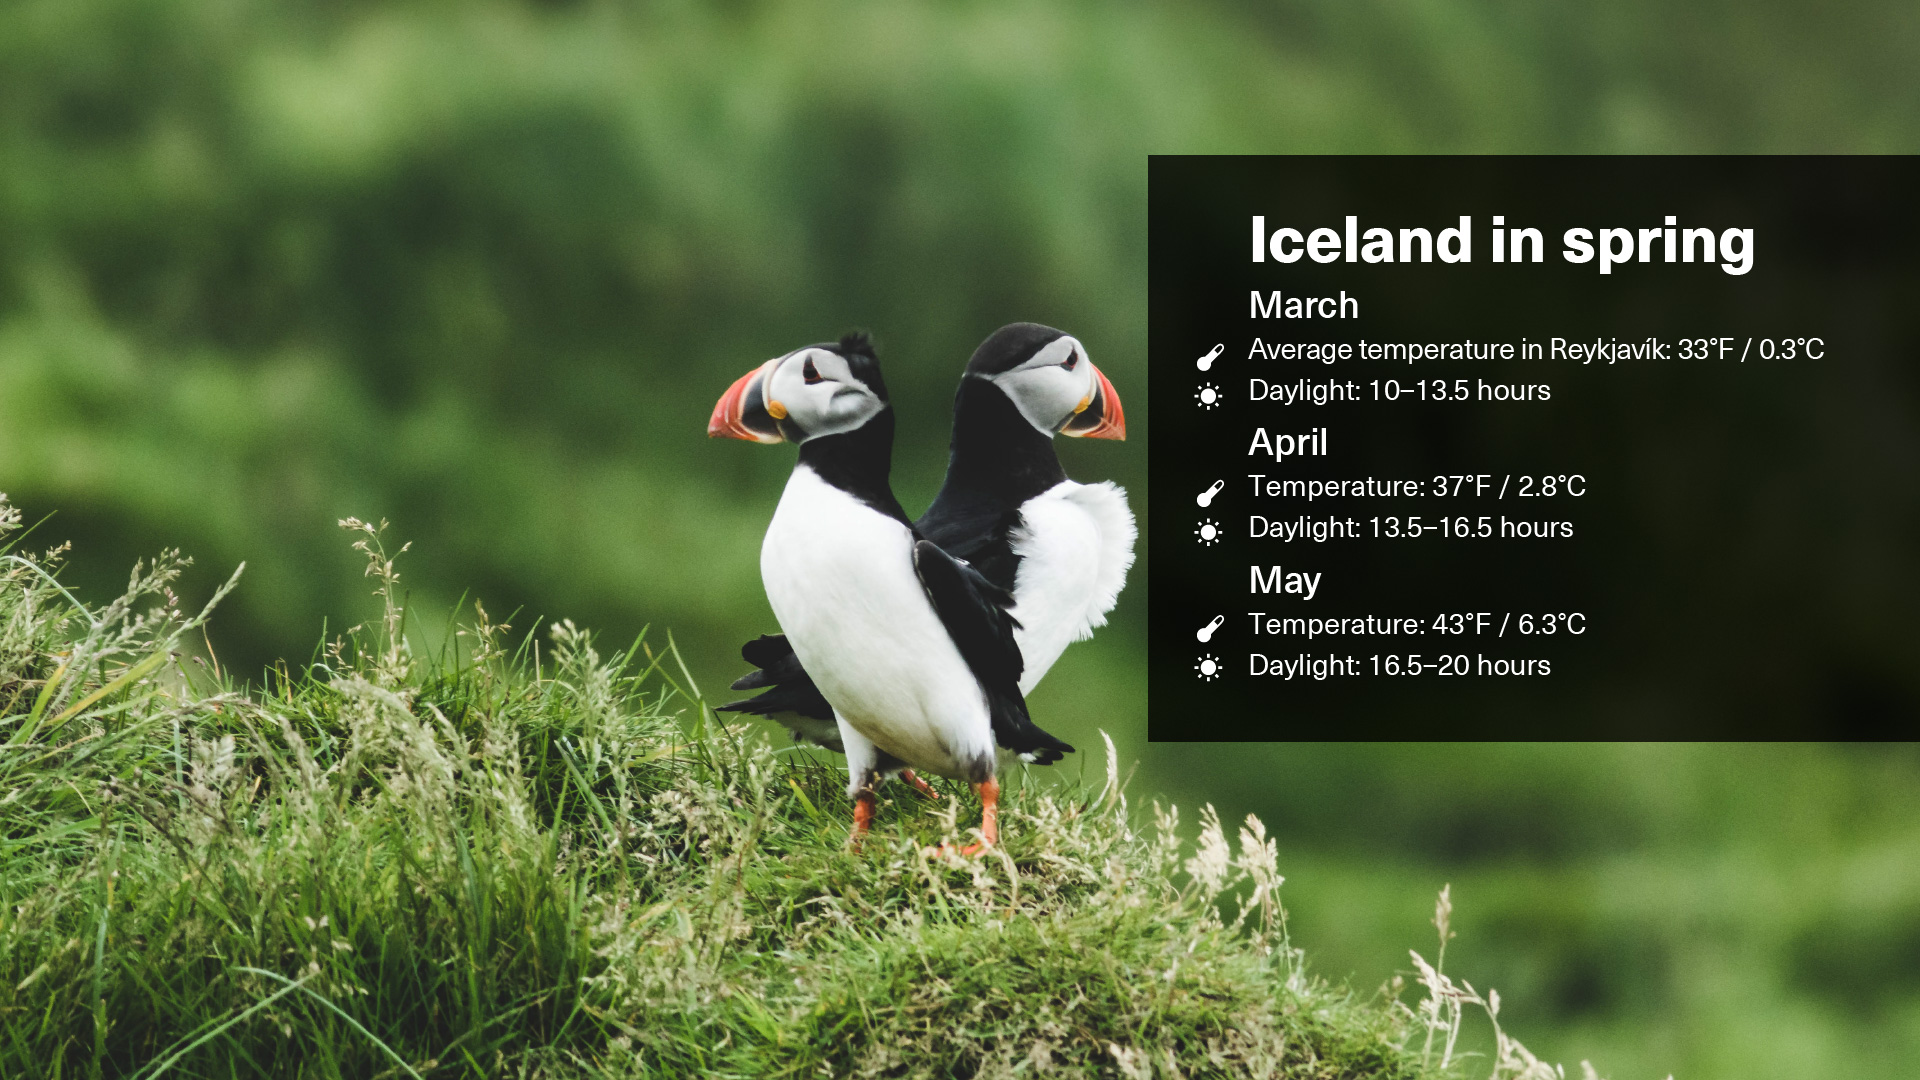 Spring weather in Iceland. Spring weather displayed on a graphic illustrative image with puffin imagery and text overleaf that shows the temperature and daylight hours in March, April and May in Iceland